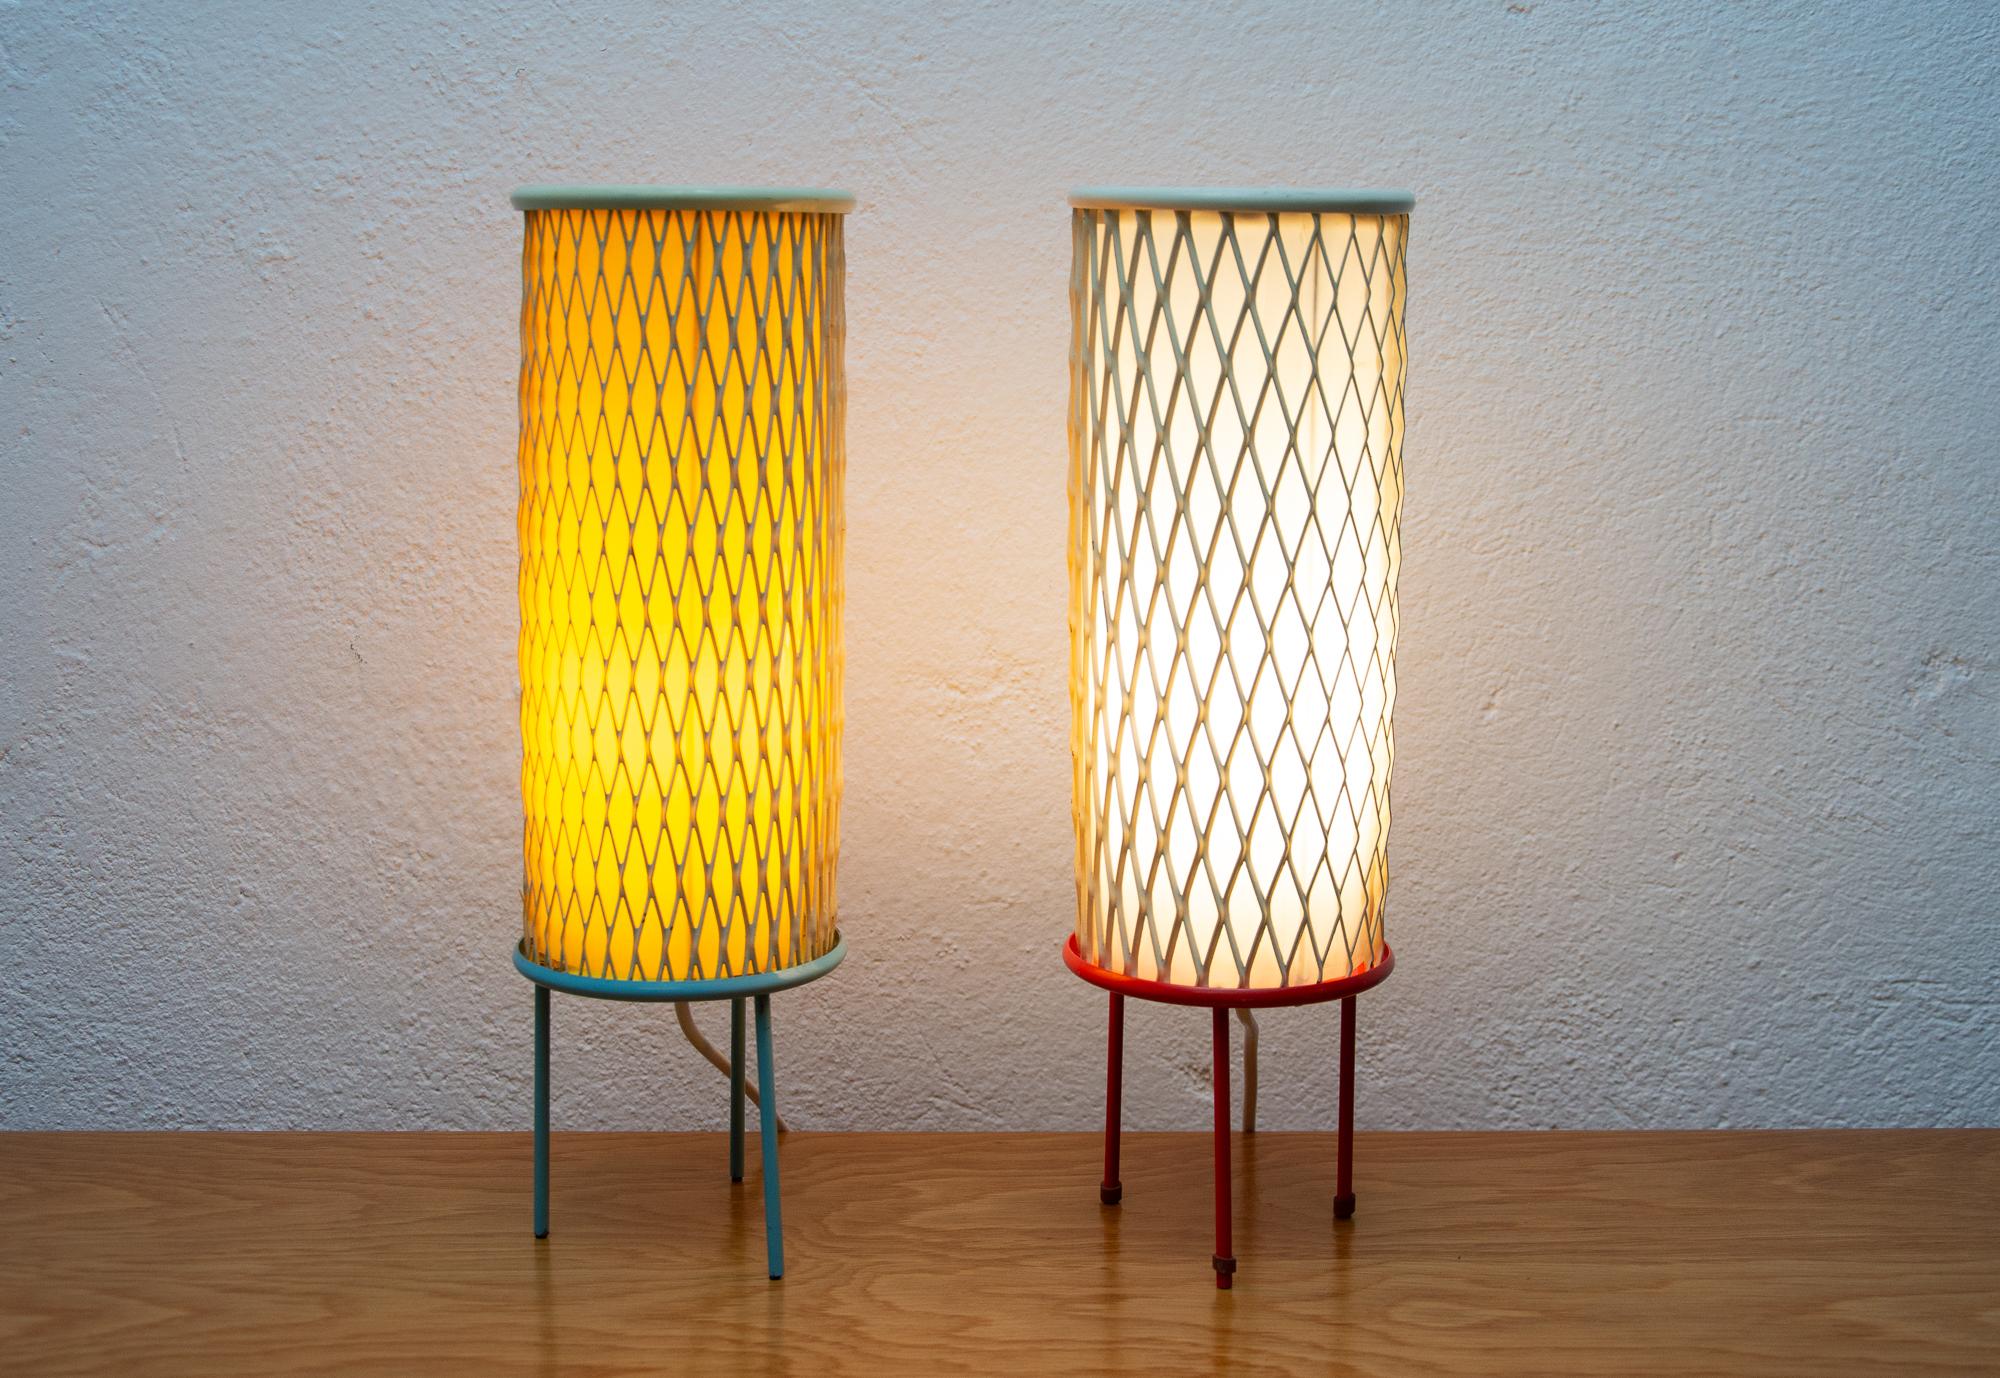 These rocket table lamps were made in the former Czechoslovakia in the 1960s. The design of these lamps is connected with the so-called Brussels period, associated with the world-famous EXPO 58 exhibition in Brussels, where the Czechoslovak Pavilion